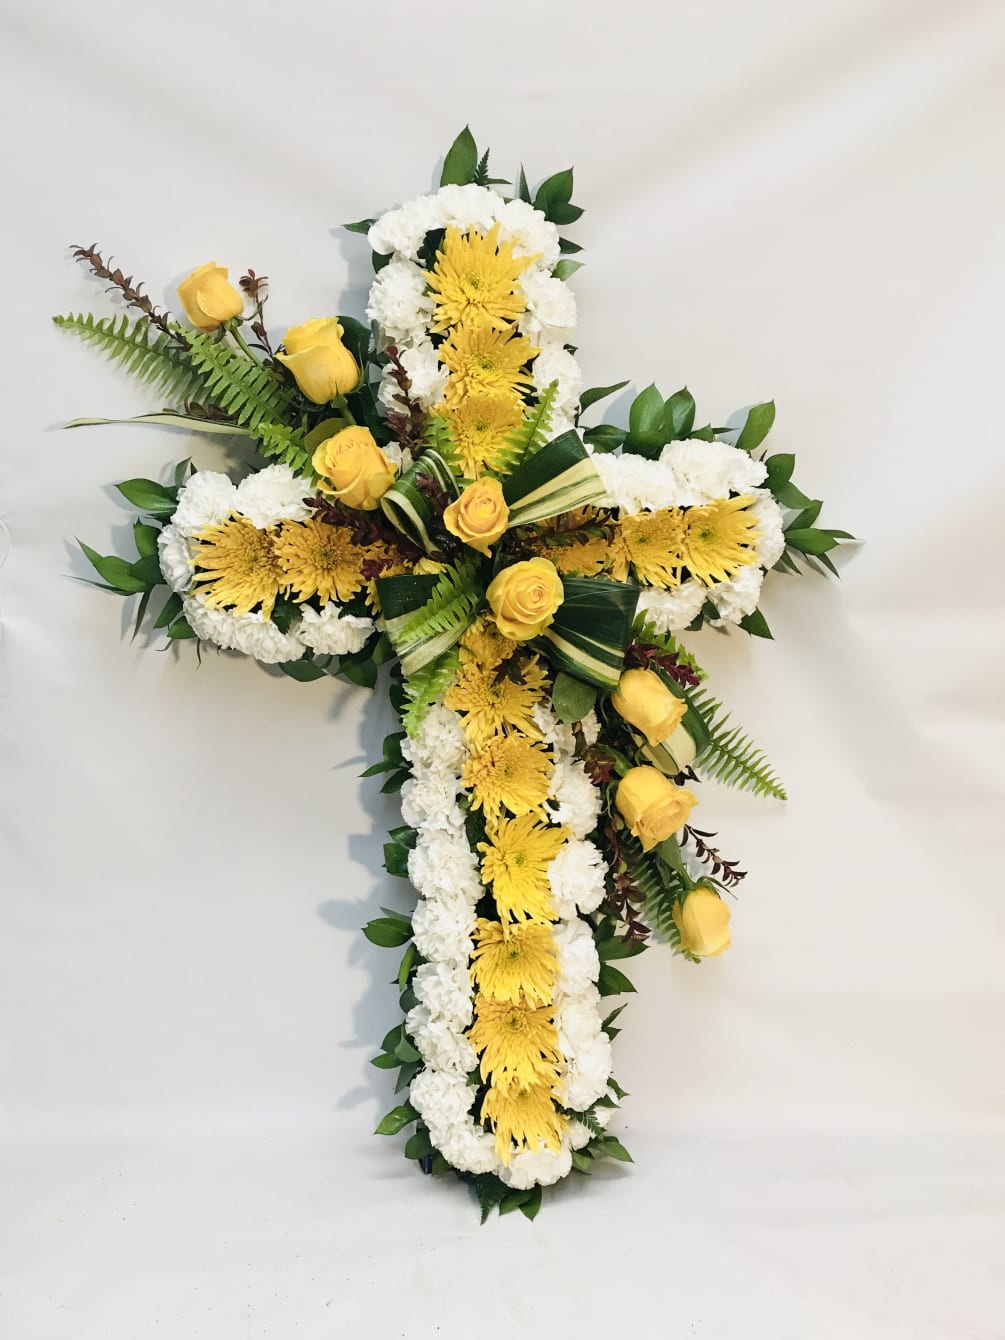 This sympathy cross is designed with yellow spider mums, surrounded by white